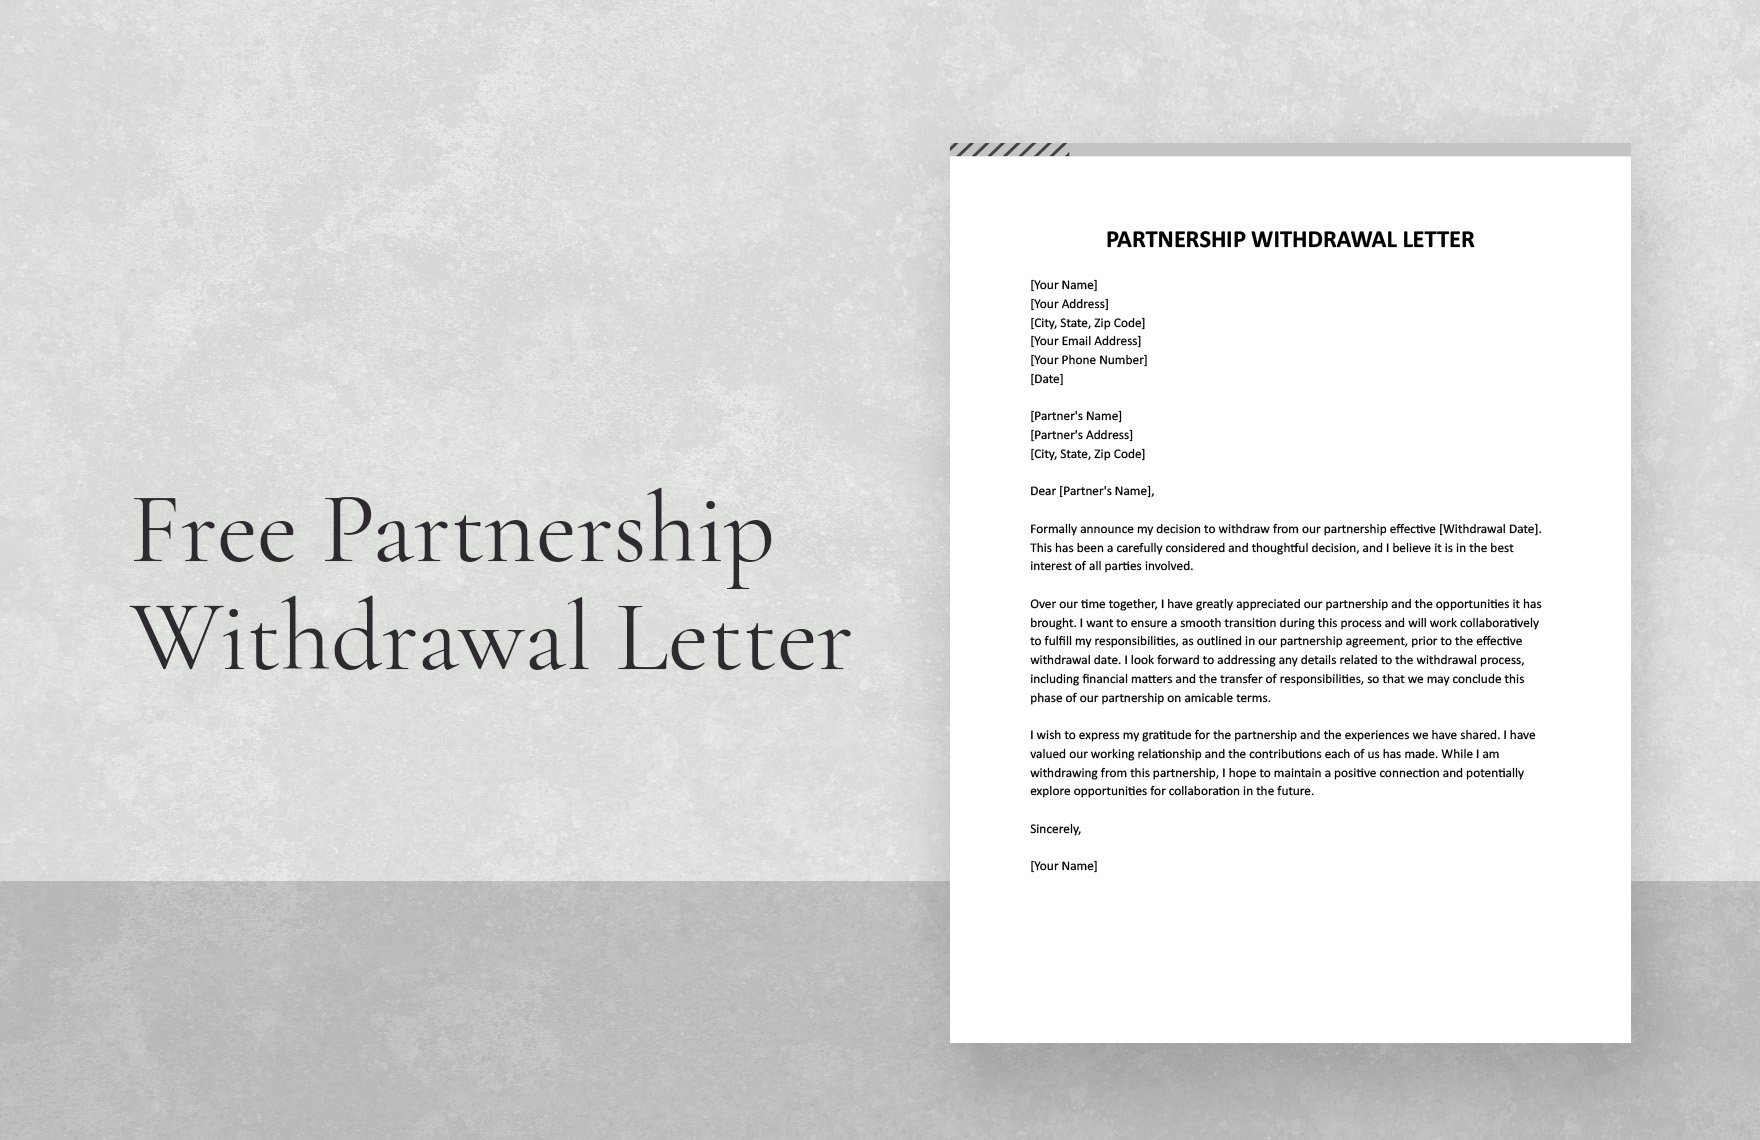 Free Partnership Withdrawal Letter